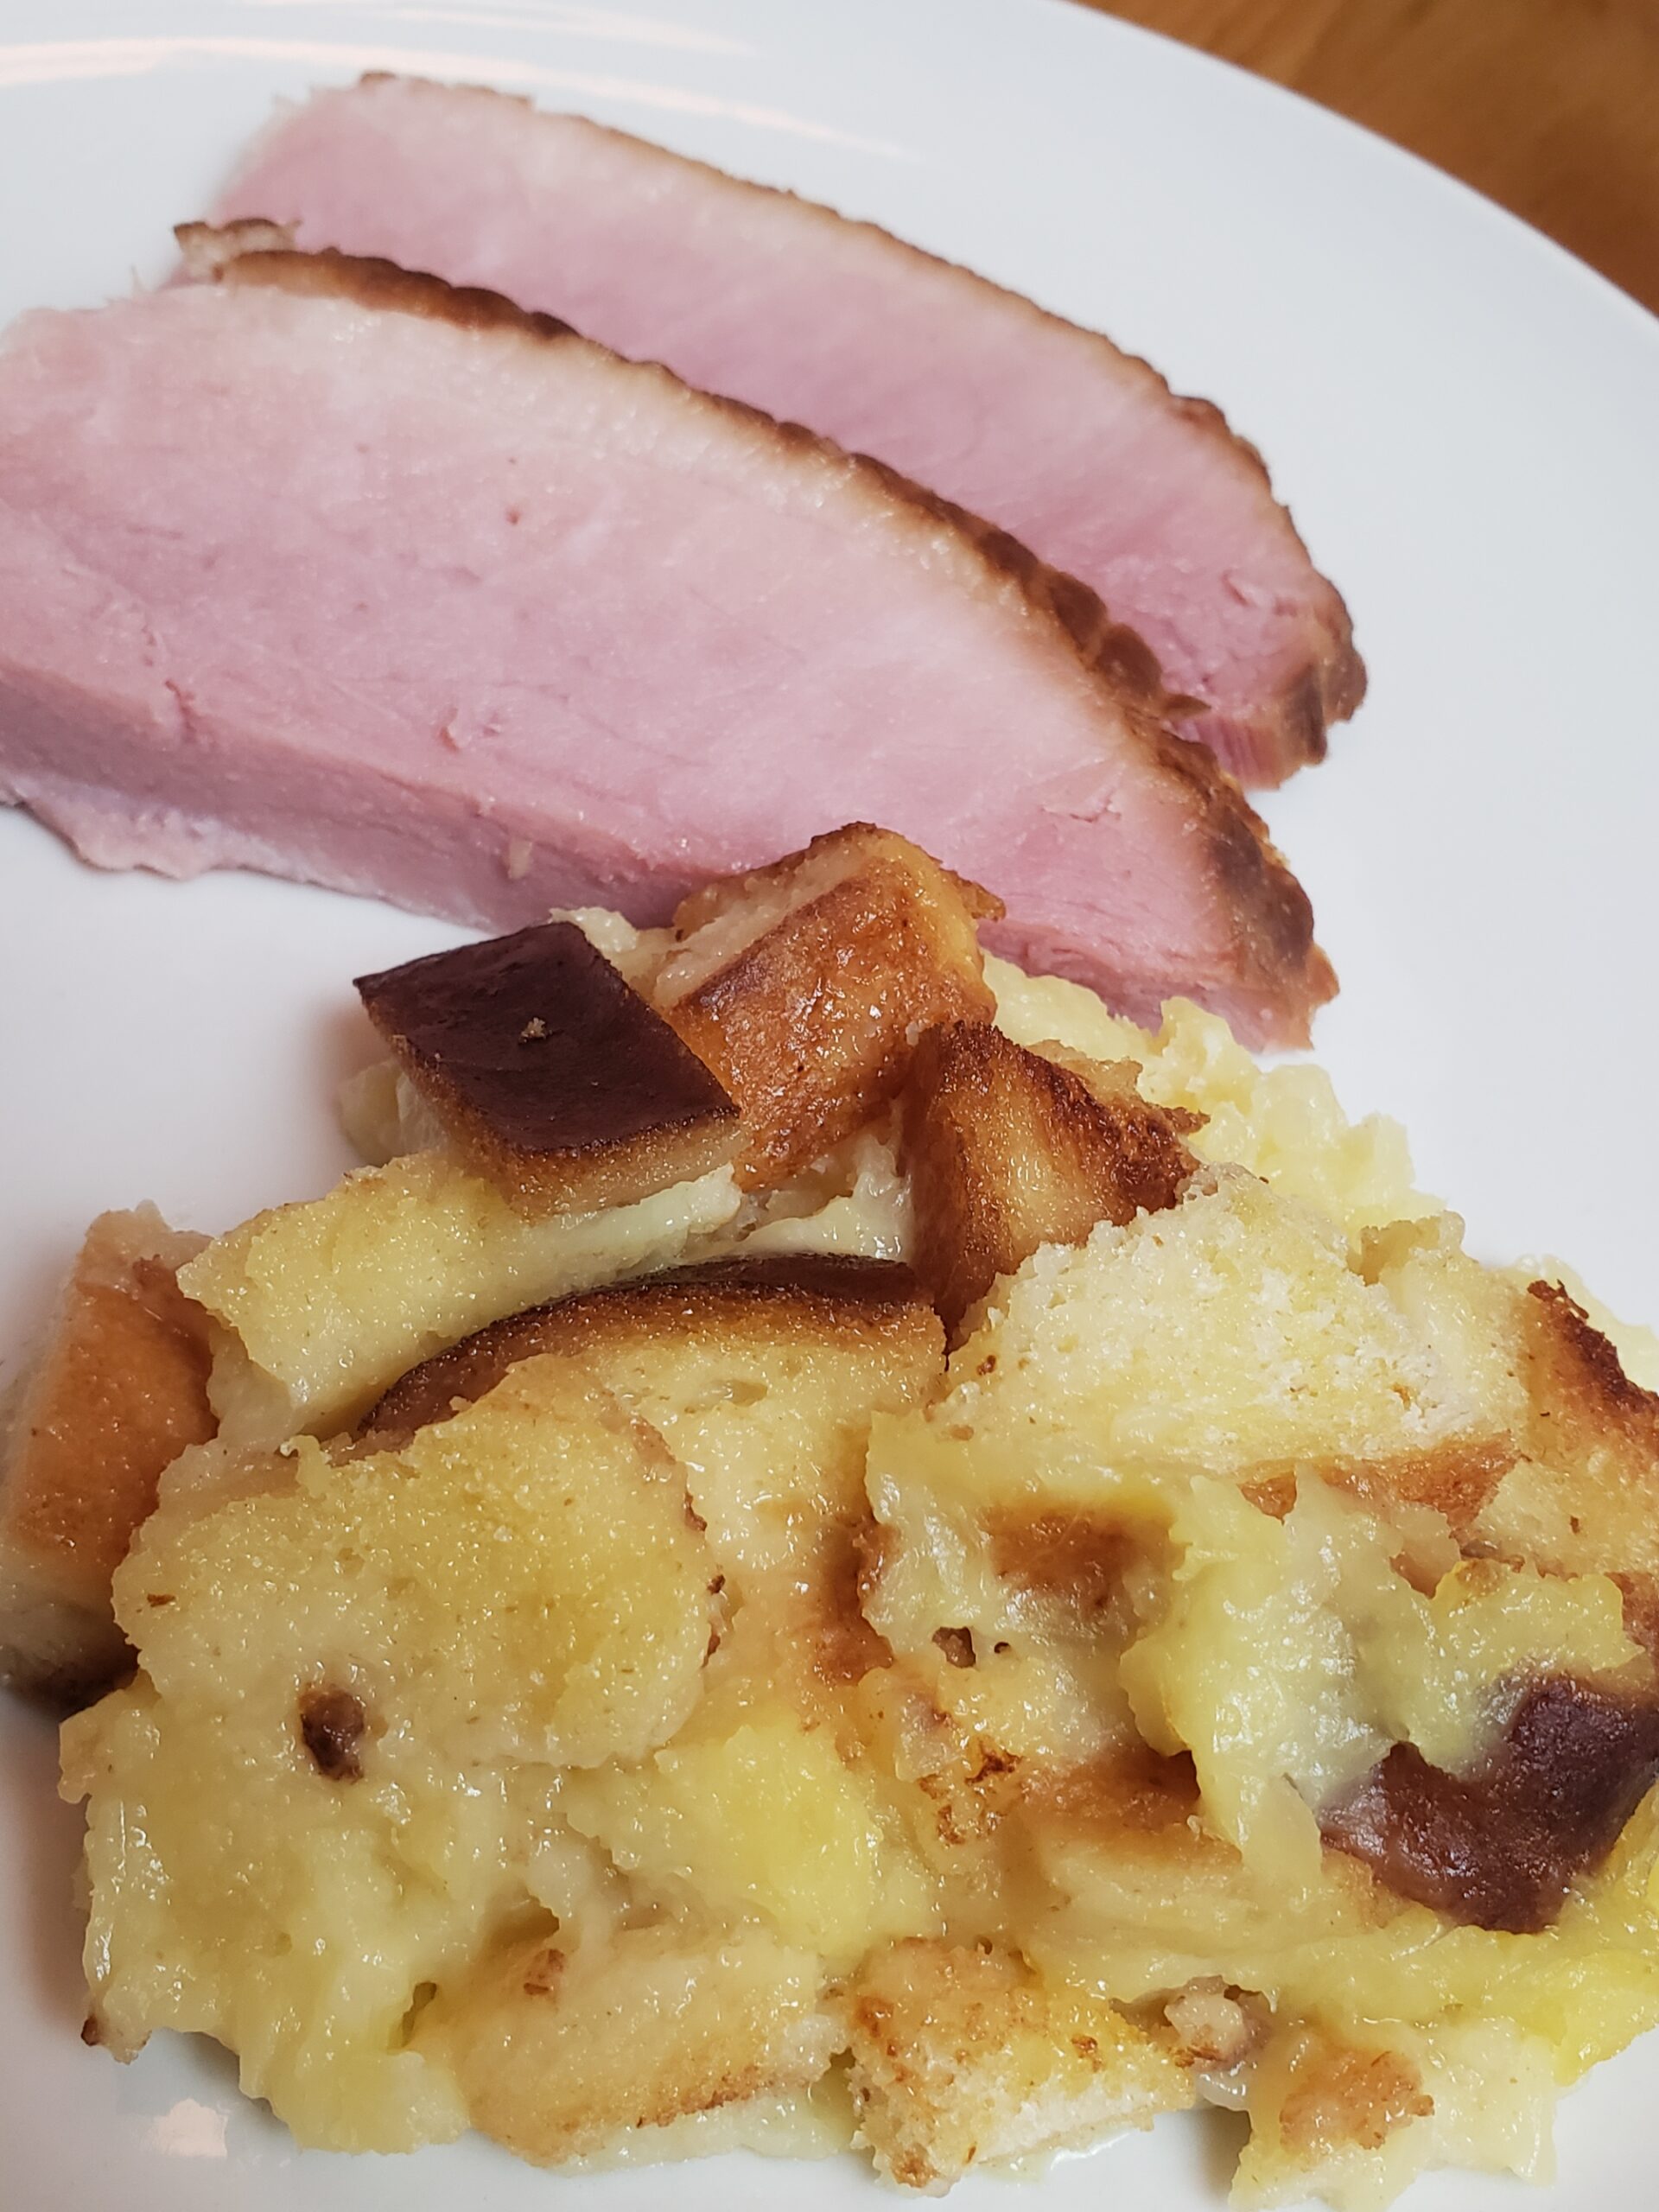 Baked Pineapple Casserole on a plate next to 2 slices of ham